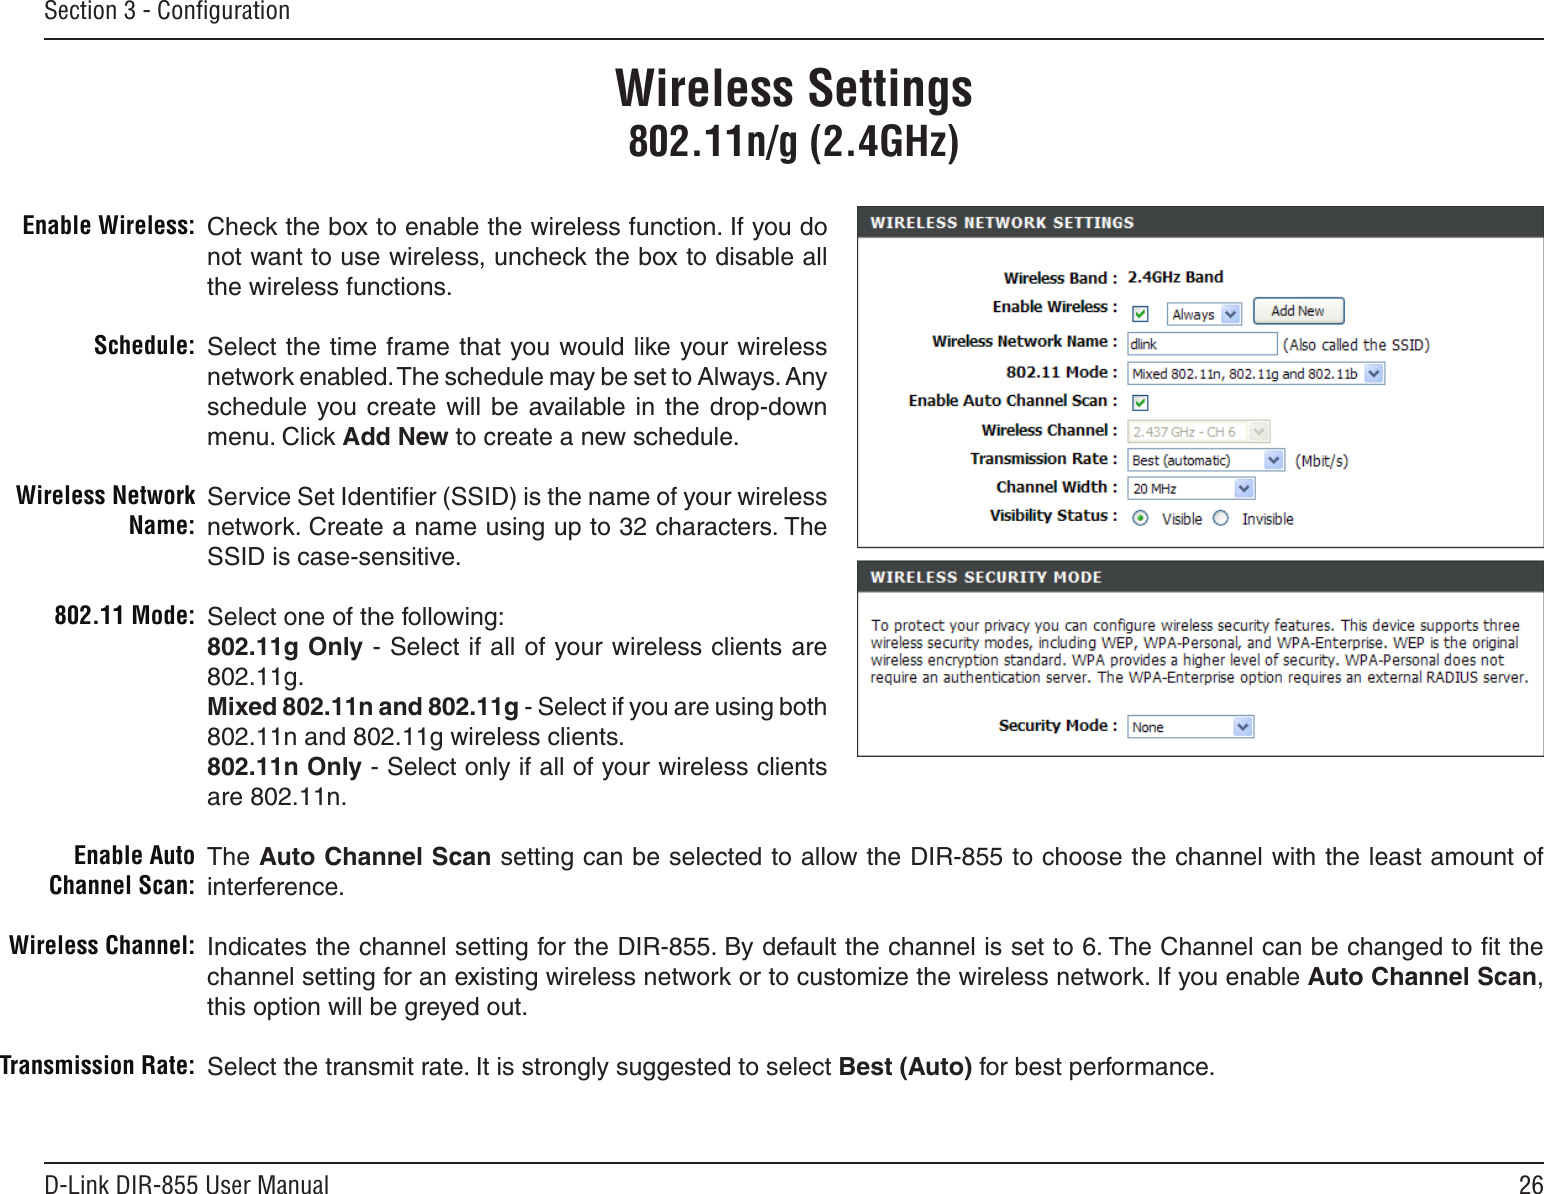 26D-Link DIR-855 User ManualSection 3 - ConﬁgurationCheck the box to enable the wireless function. If you do not want to use wireless, uncheck the box to disable all the wireless functions.Select the time frame that you would like your wireless network enabled. The schedule may be set to Always. Any schedule  you create  will  be  available in the  drop-down menu. Click Add New to create a new schedule.Service Set Identiﬁer (SSID) is the name of your wireless network. Create a name using up to 32 characters. The SSID is case-sensitive.Select one of the following:802.11g Only - Select if all of your wireless clients are 802.11g.Mixed 802.11n and 802.11g - Select if you are using both 802.11n and 802.11g wireless clients.802.11n Only - Select only if all of your wireless clients are 802.11n.The Auto Channel Scan setting can be selected to allow the DIR-855 to choose the channel with the least amount of interference.Indicates the channel setting for the DIR-855. By default the channel is set to 6. The Channel can be changed to ﬁt the channel setting for an existing wireless network or to customize the wireless network. If you enable Auto Channel Scan, this option will be greyed out.Select the transmit rate. It is strongly suggested to select Best (Auto) for best performance.Enable Wireless:Schedule:Wireless Network Name:802.11 Mode:Enable Auto Channel Scan:Wireless Channel:Transmission Rate:Wireless Settings802.11n/g (2.4GHz)